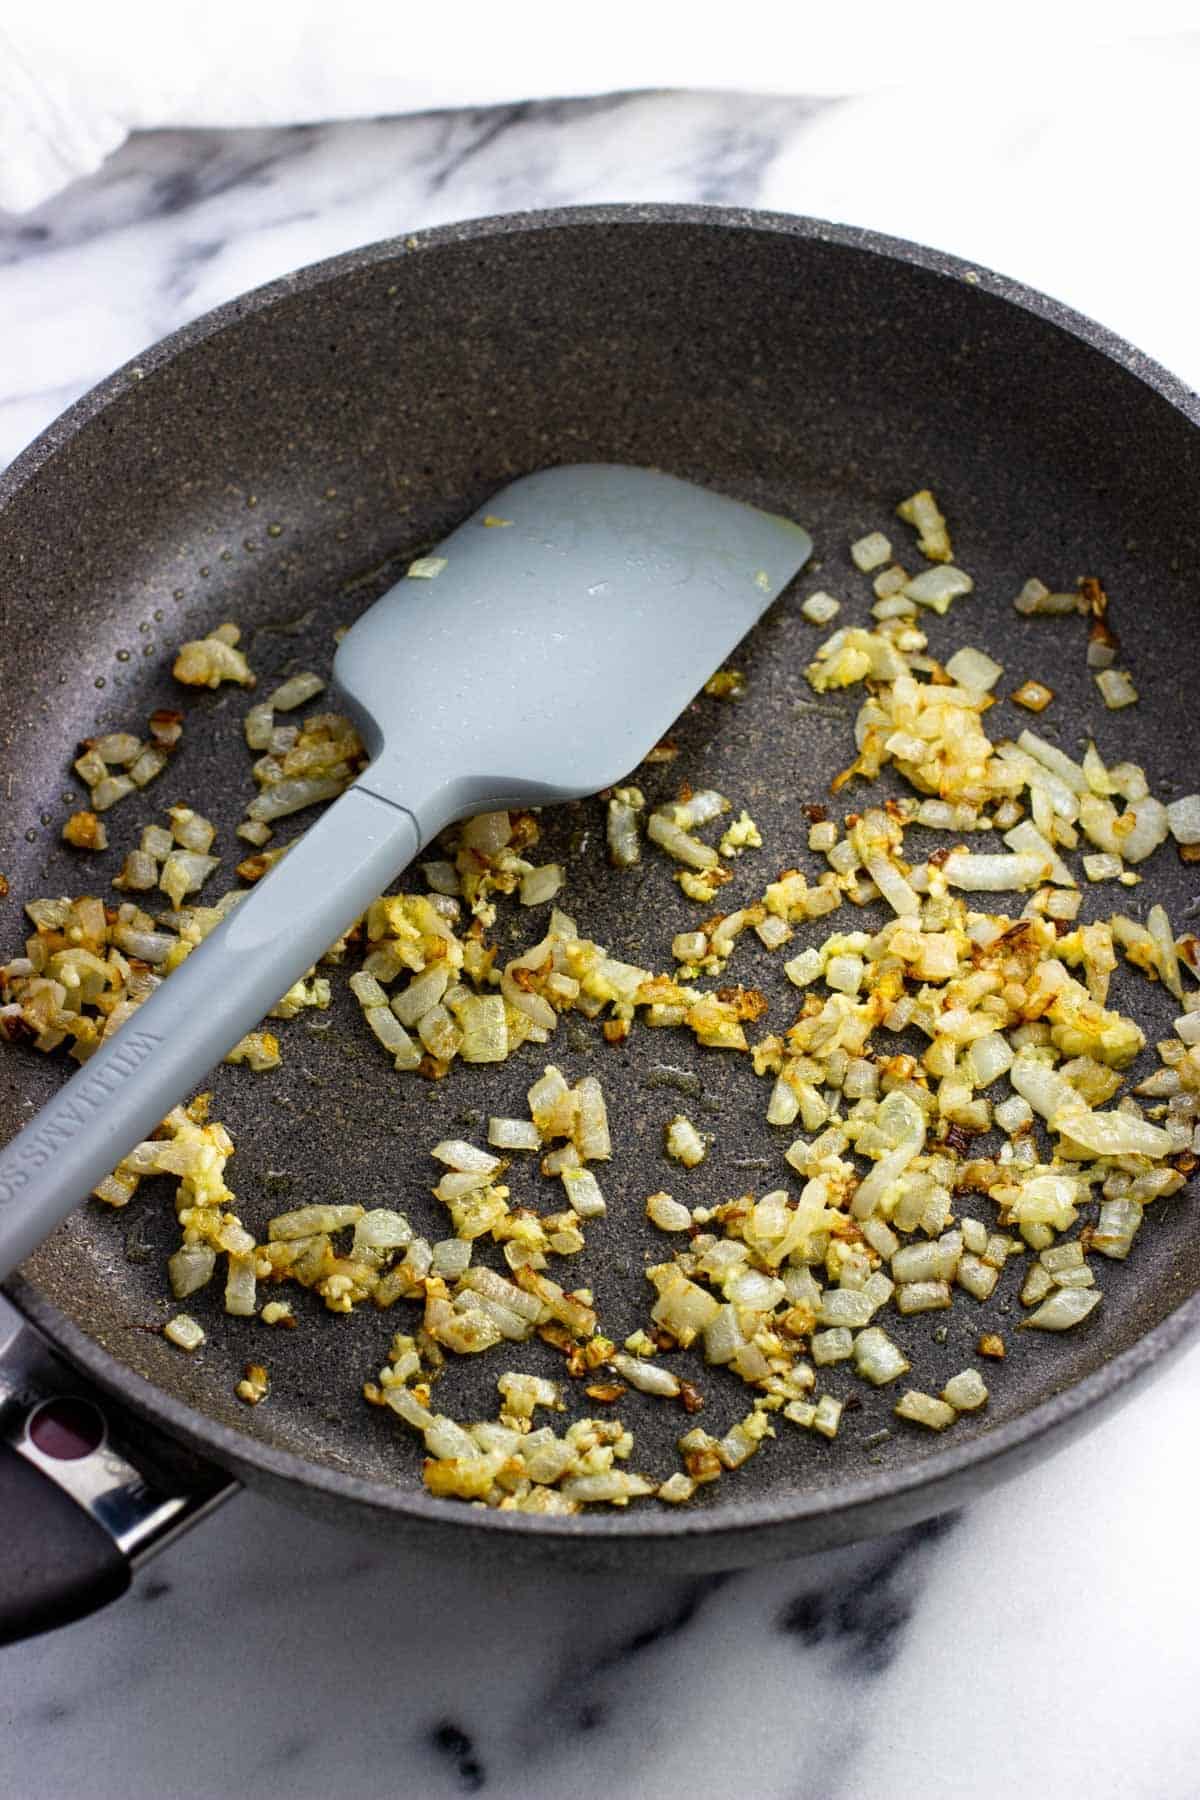 Sautéed onion and garlic in a skillet with a spatula.